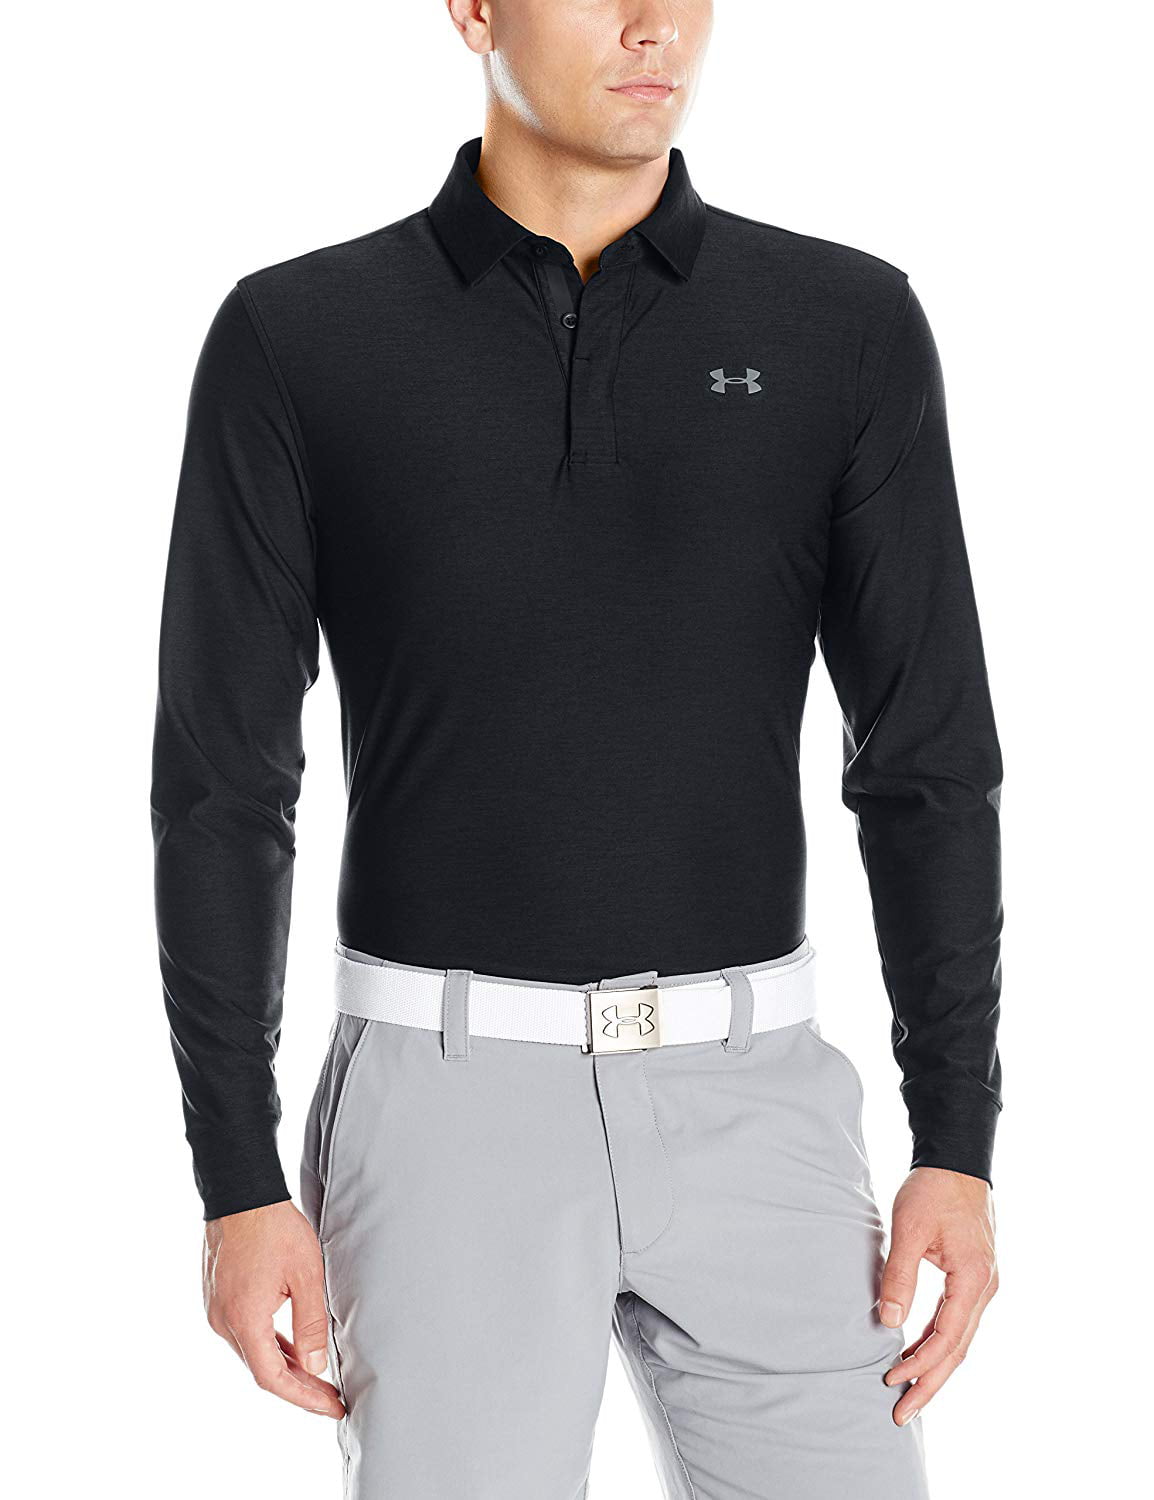 under armor collared shirts